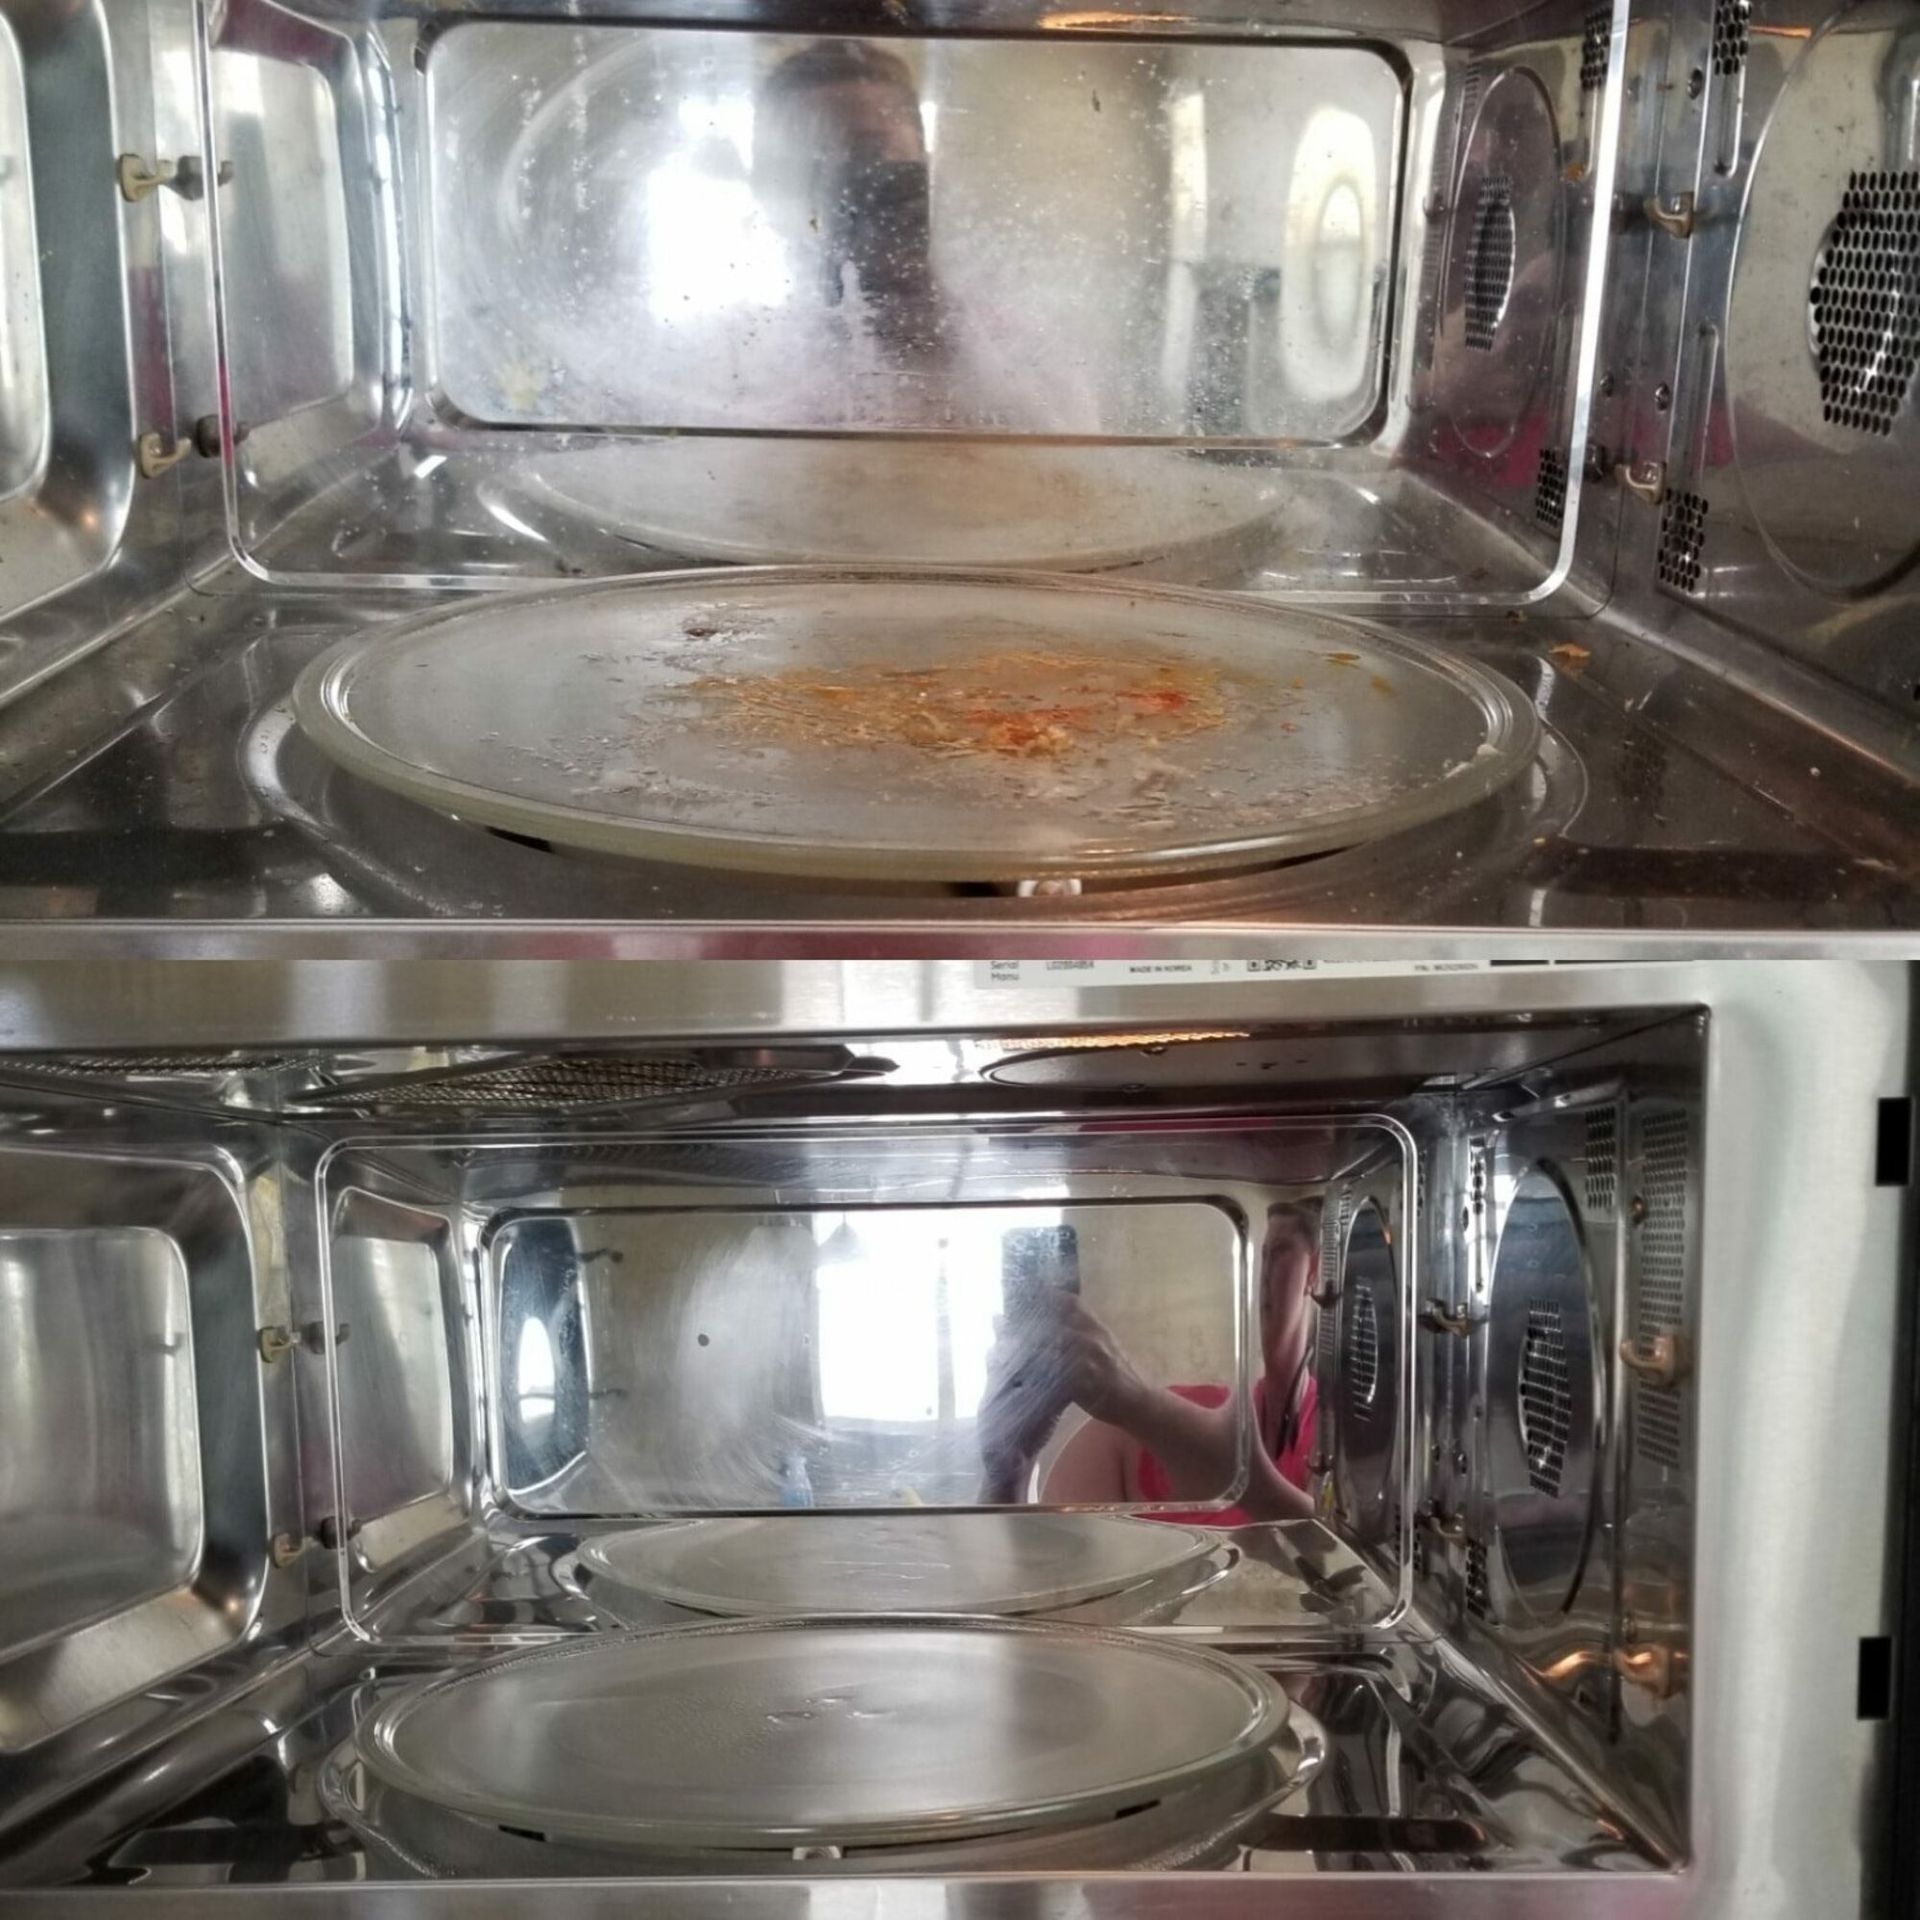 The inside of a microwave oven before and after being cleaned